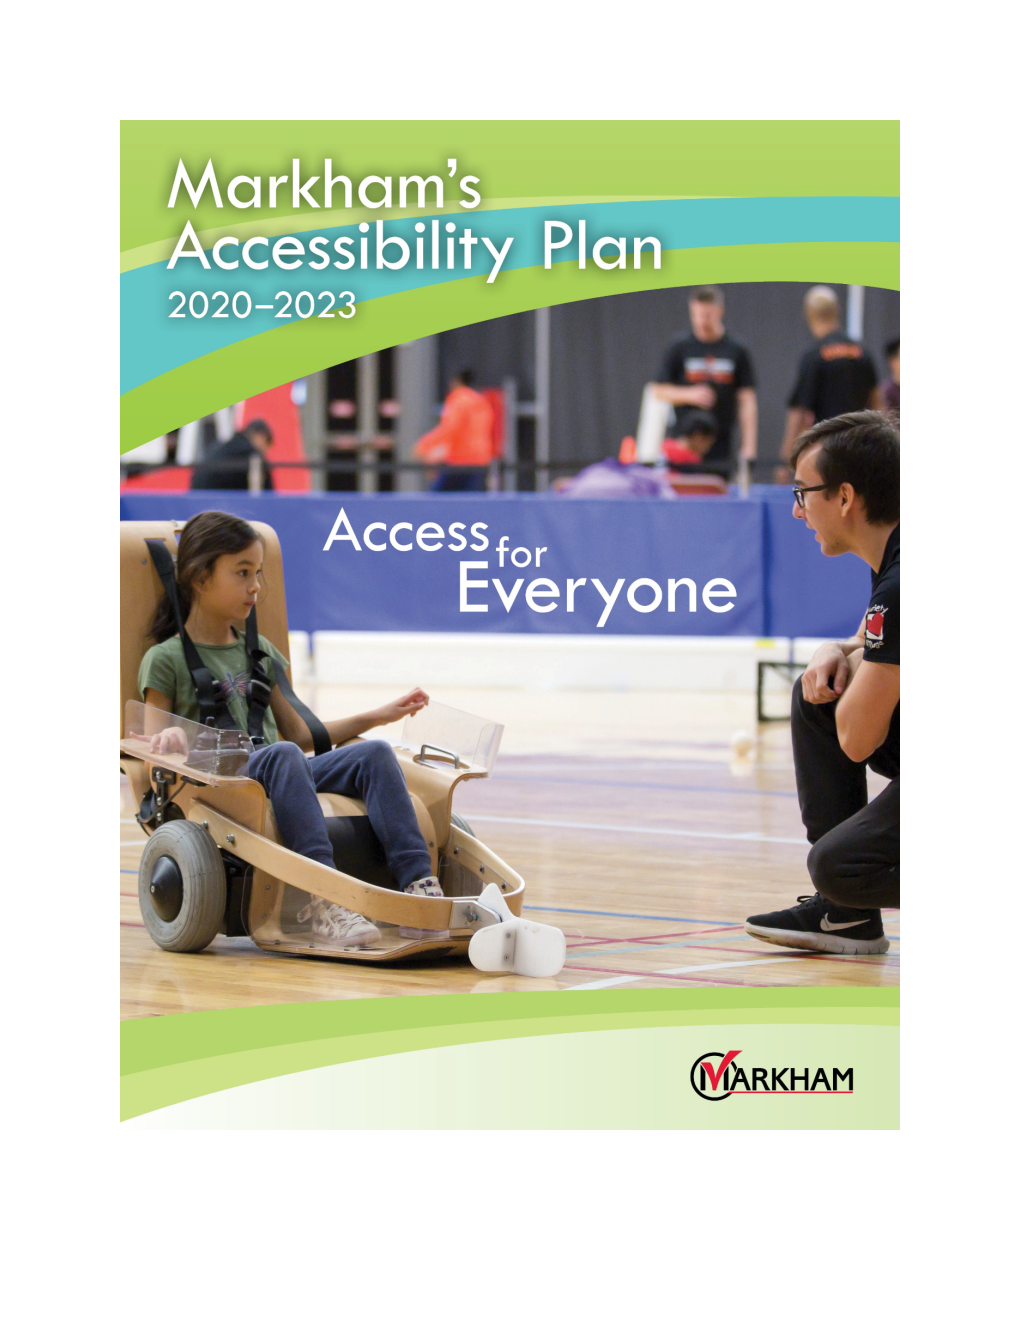 Advisory Committee on Accessibility